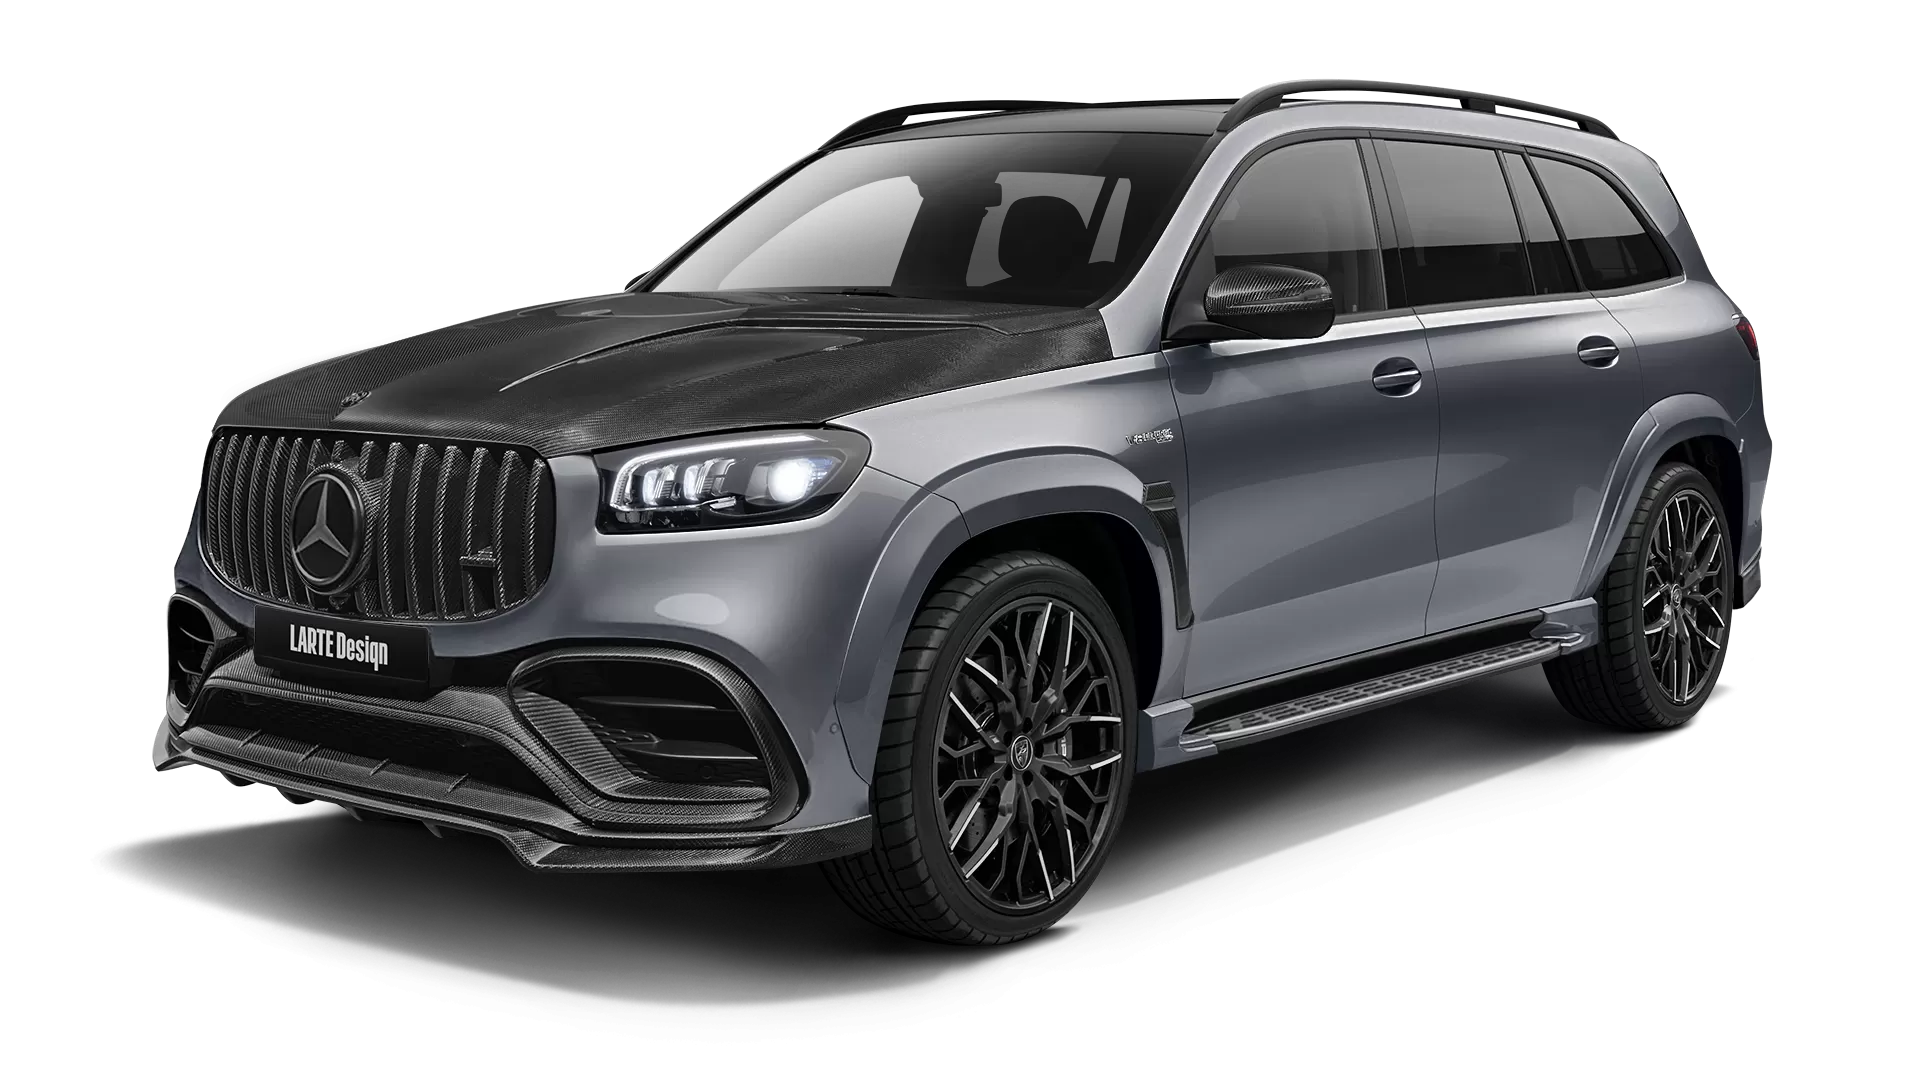 Mercedes GLS 63 AMG X167 with carbon body kit: front view shown in Selenite Grey